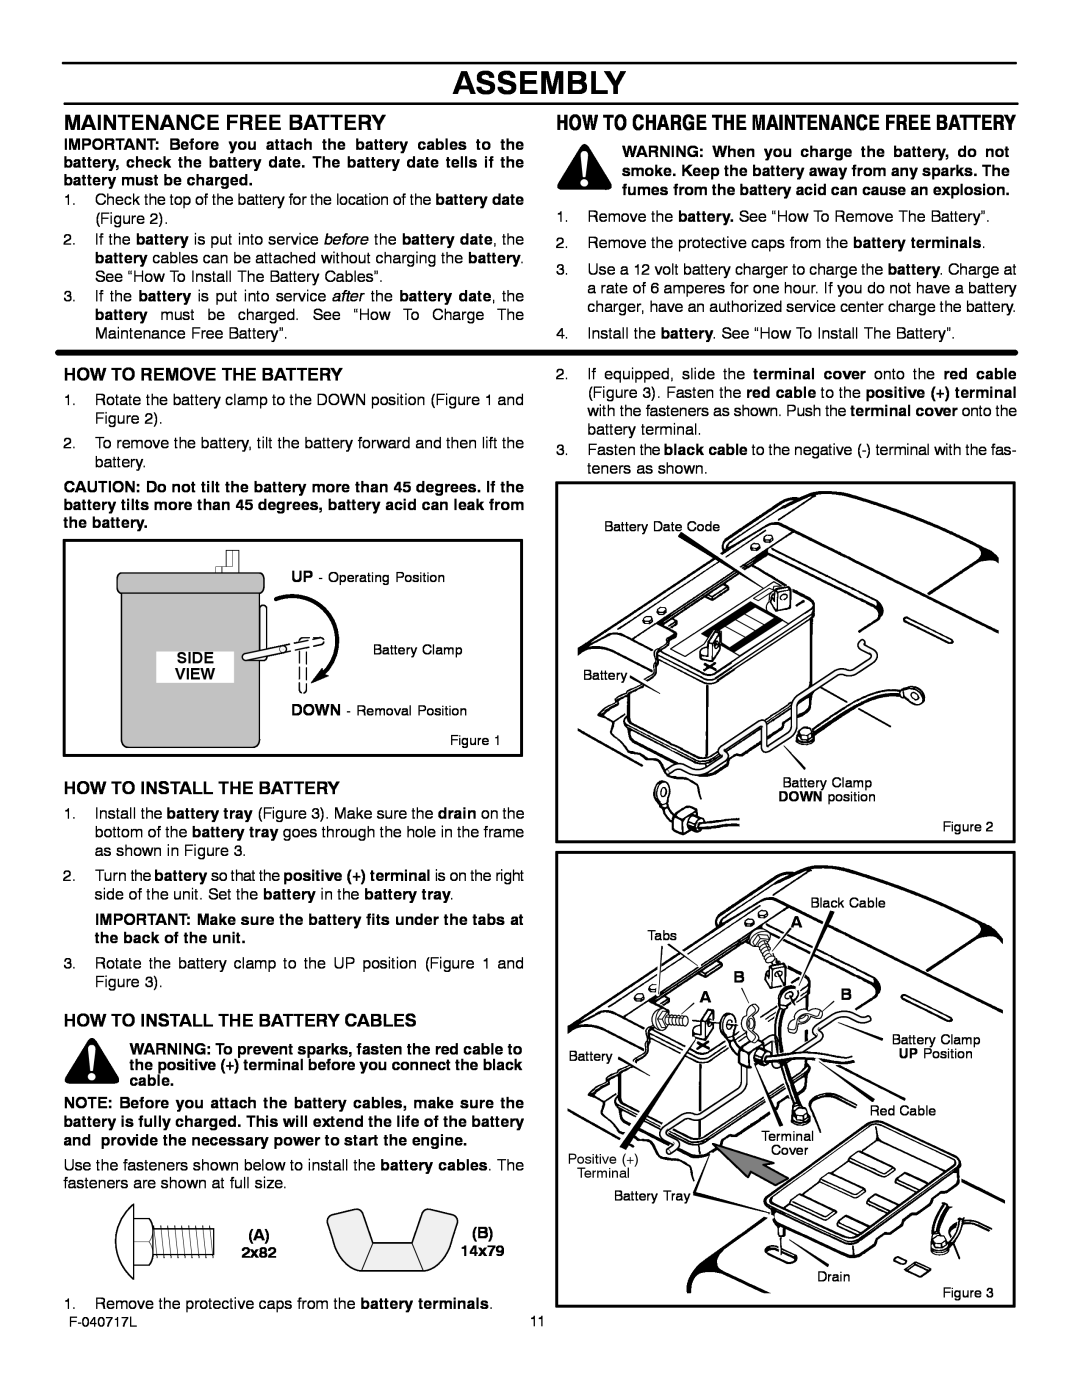 Murray 387002x92A manual Assembly, How To Charge The Maintenance Free Battery 